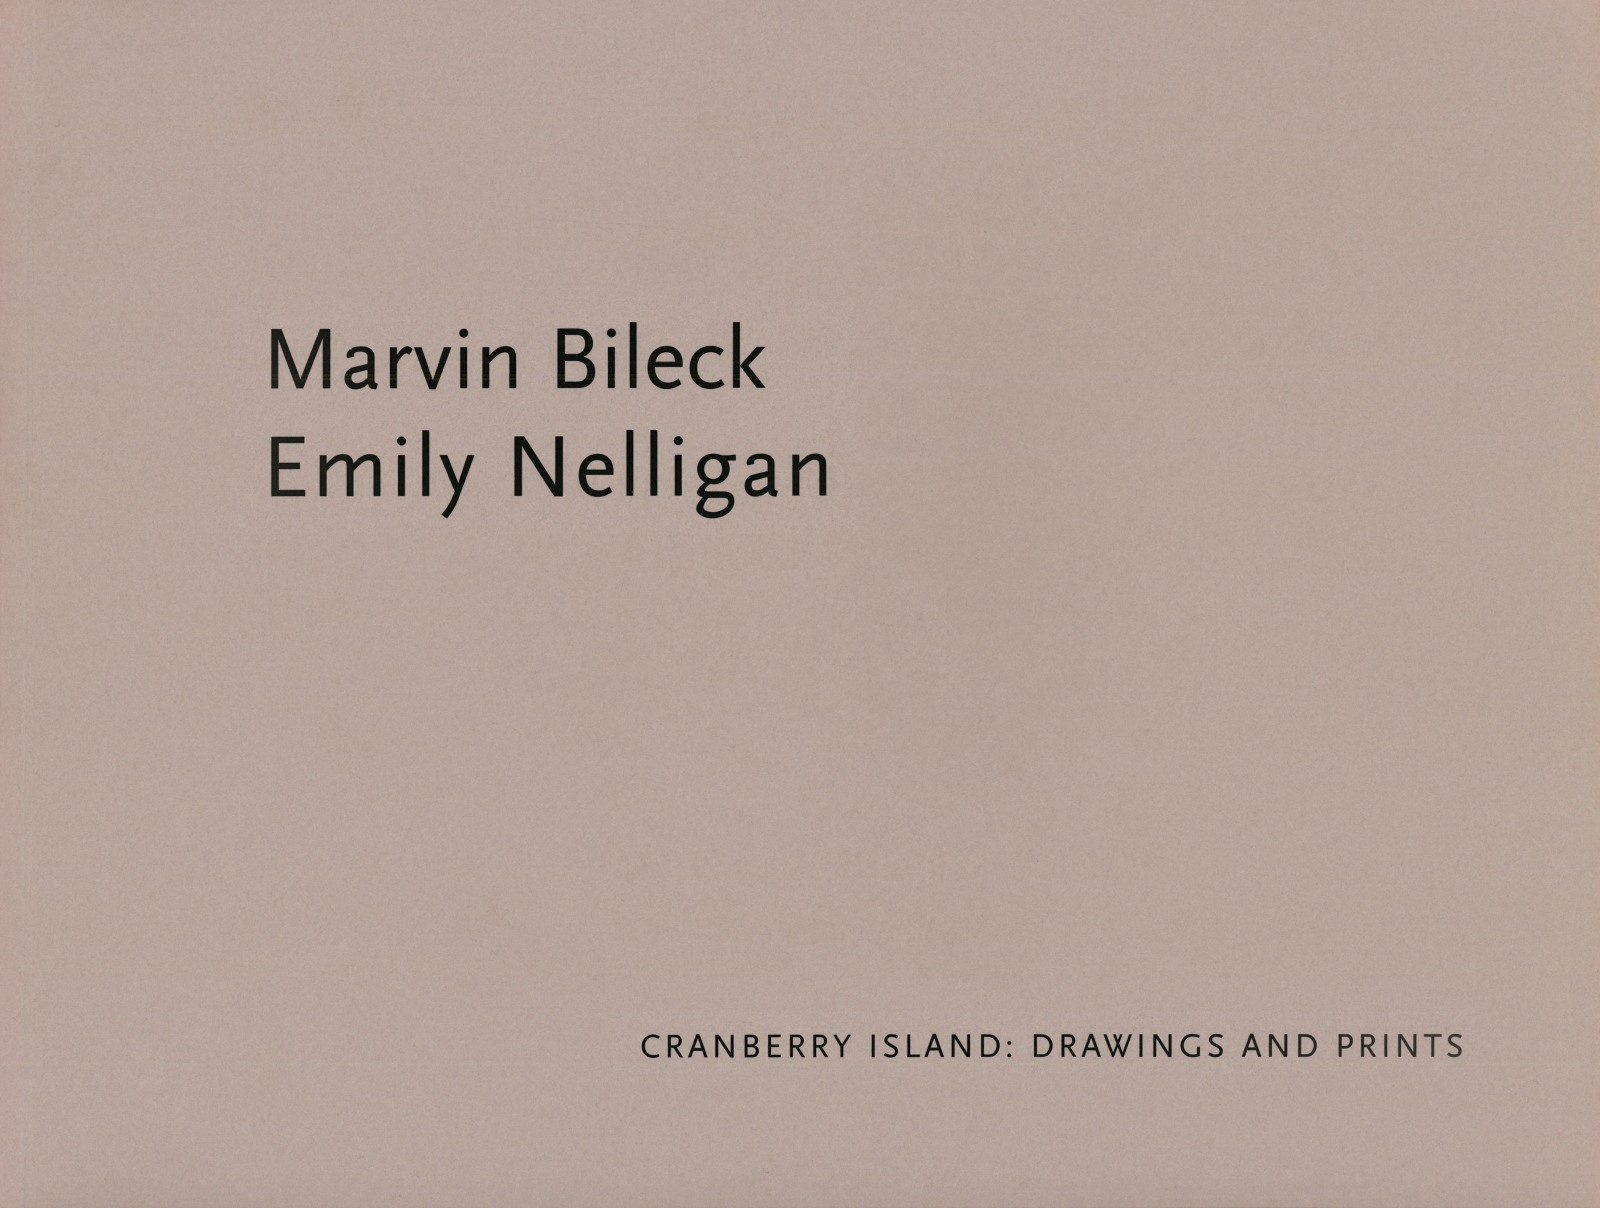 Cranberry Island: Drawings and Prints - Marvin Bileck | Emily Nelligan - Catalogues - Alexandre Gallery